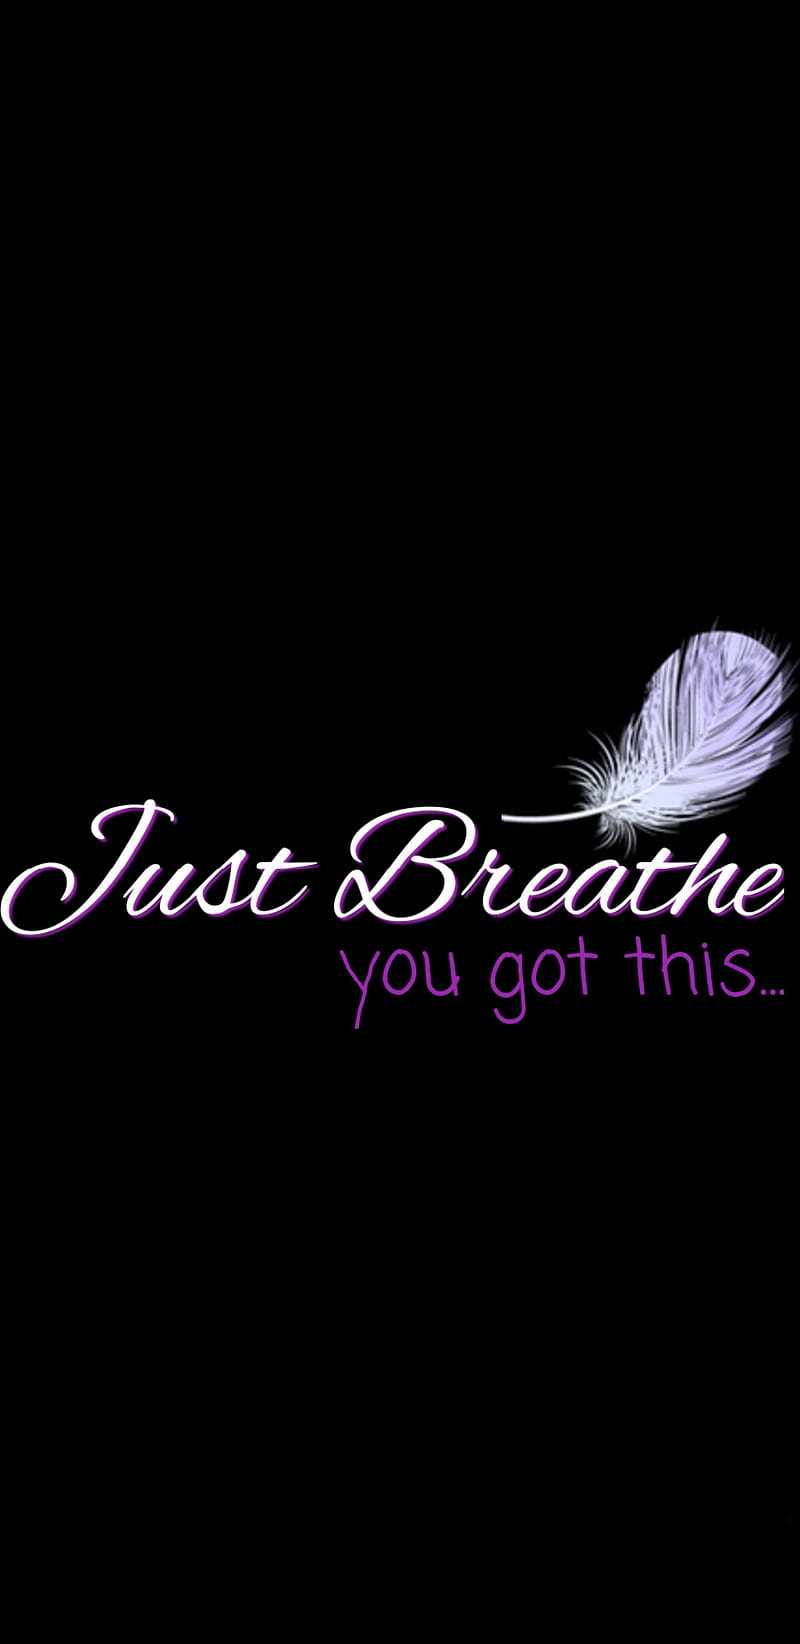 Just Breathe, black, encourage, feather, galaxy purple, quote, simple, HD phone wallpaper